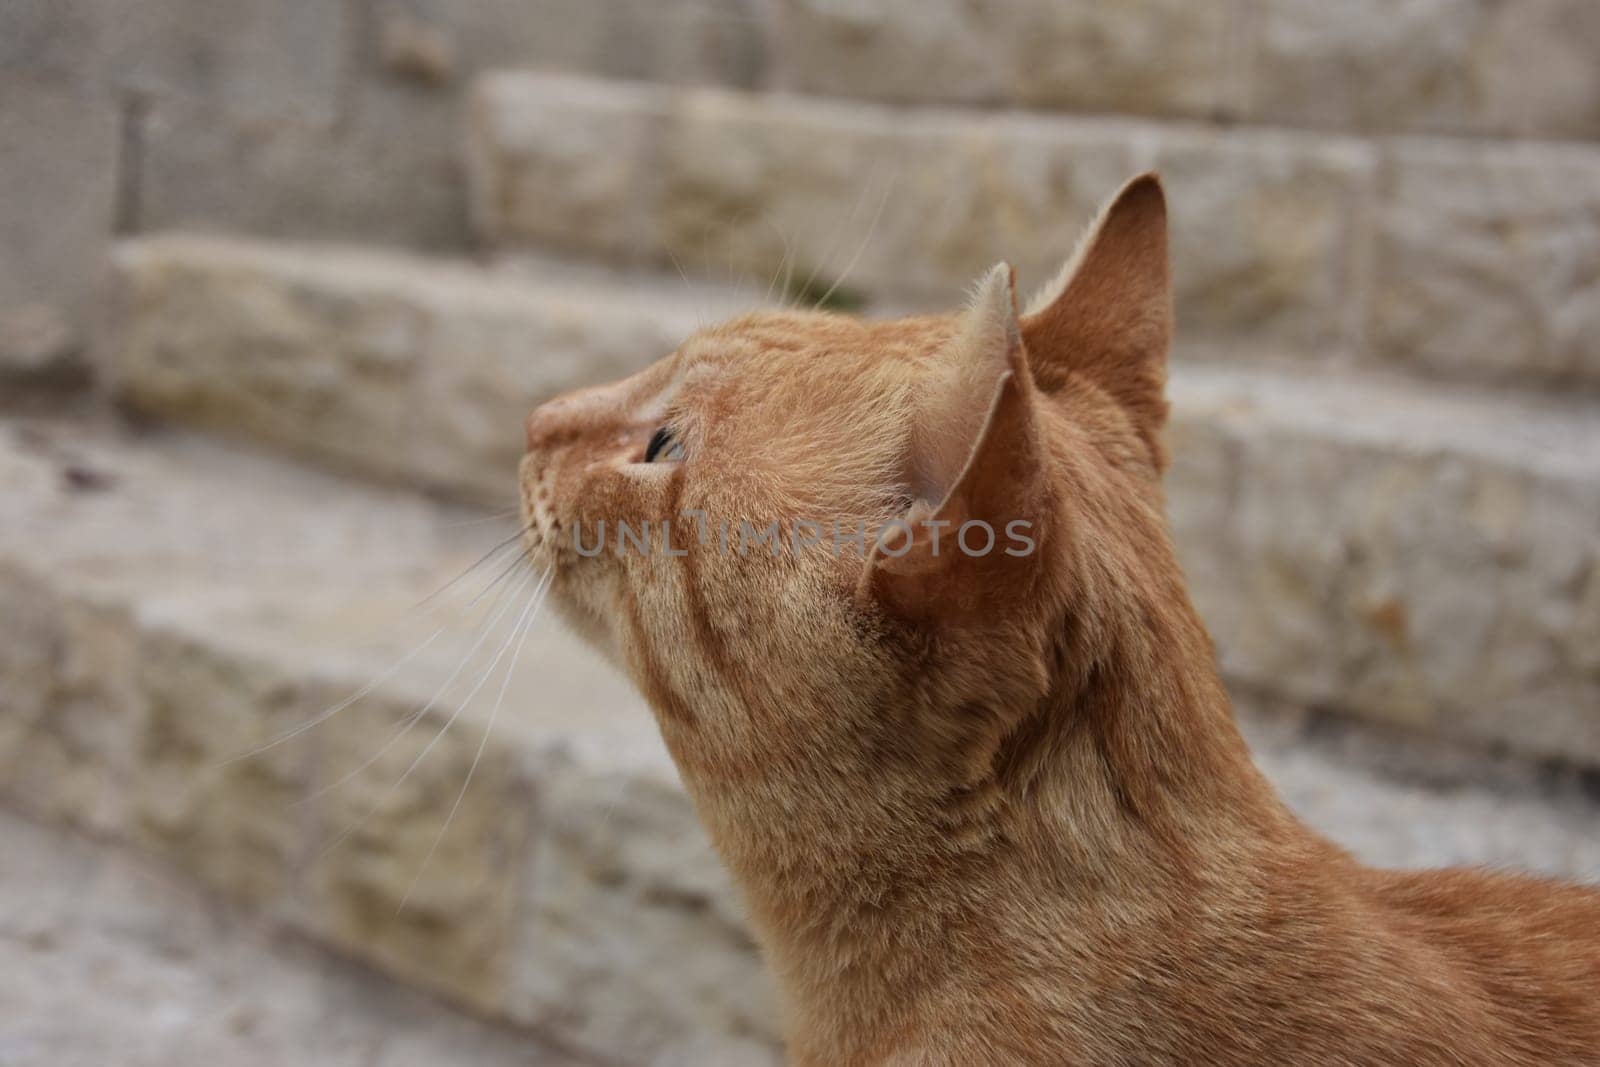 portrait of a ginger cat in profile against the background of the steps of an old stone staircase in Jerusalem, Israel 2021. High quality photo